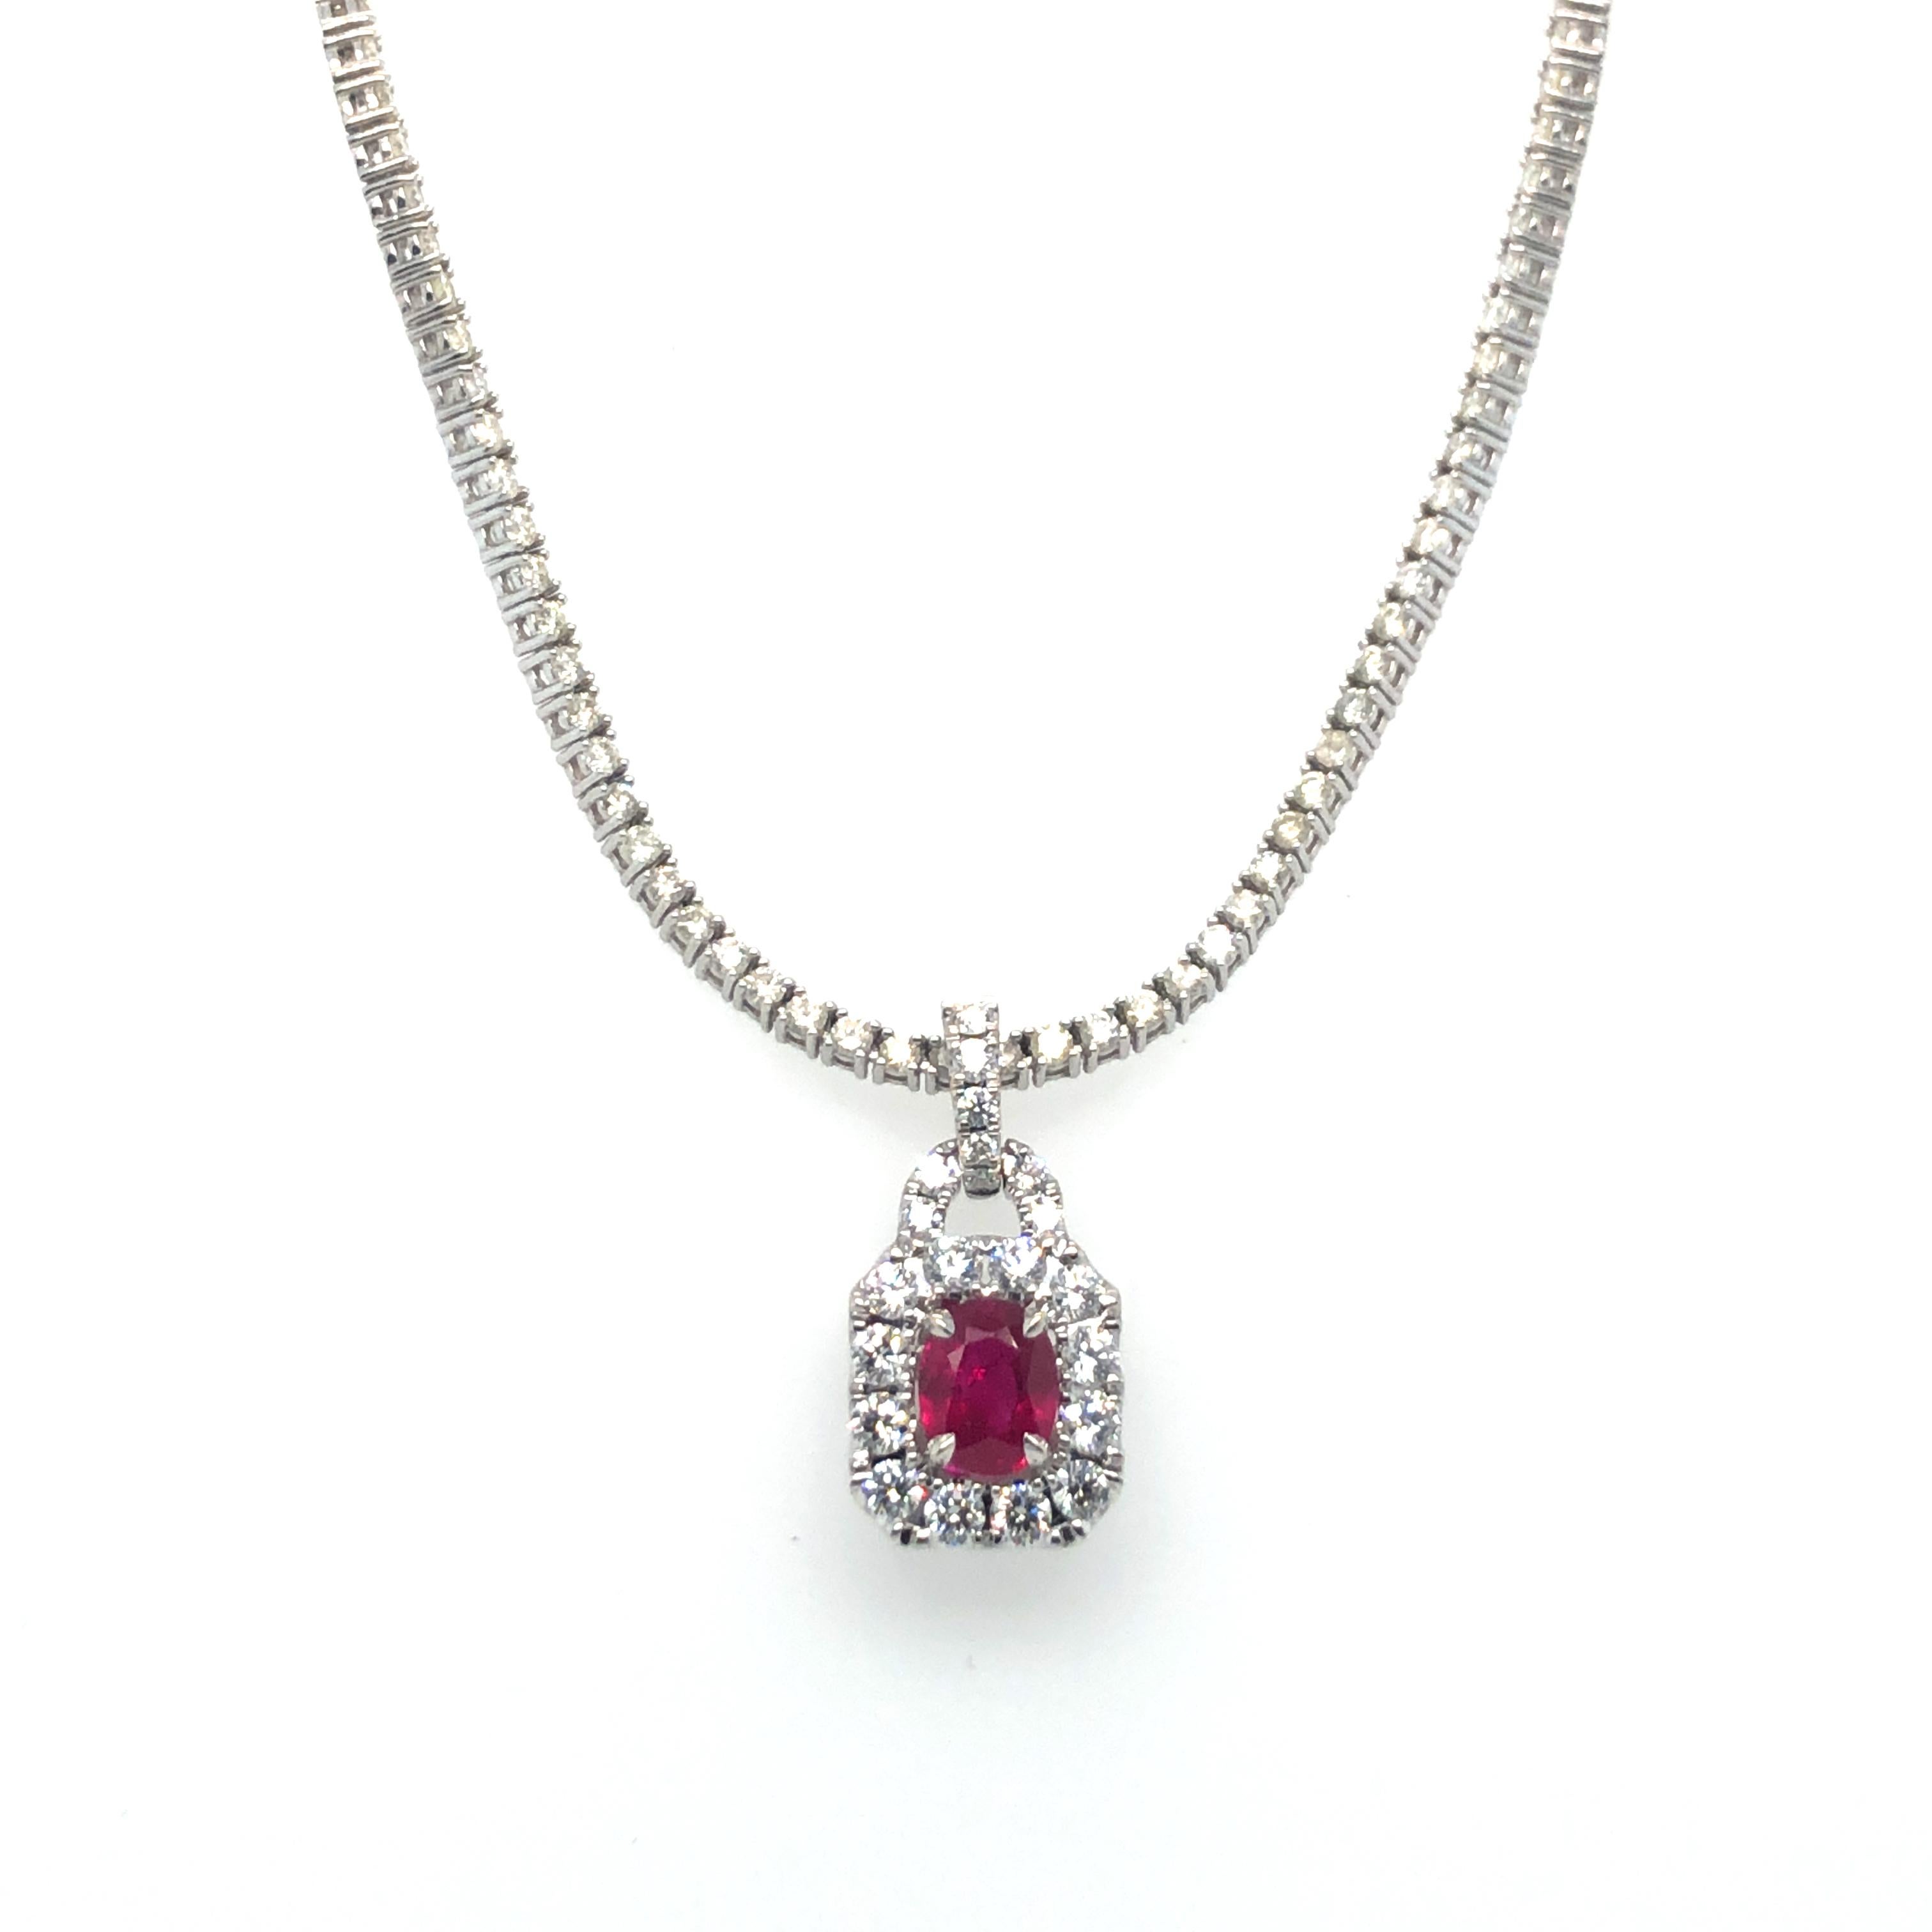 Ruby and Diamond Pendant Riviera Necklace in 18K White Gold. The pendant features an oval cut ruby that is approximately 1 carat,  accented by a halo of brilliant cut round diamonds. Then necklace is 18